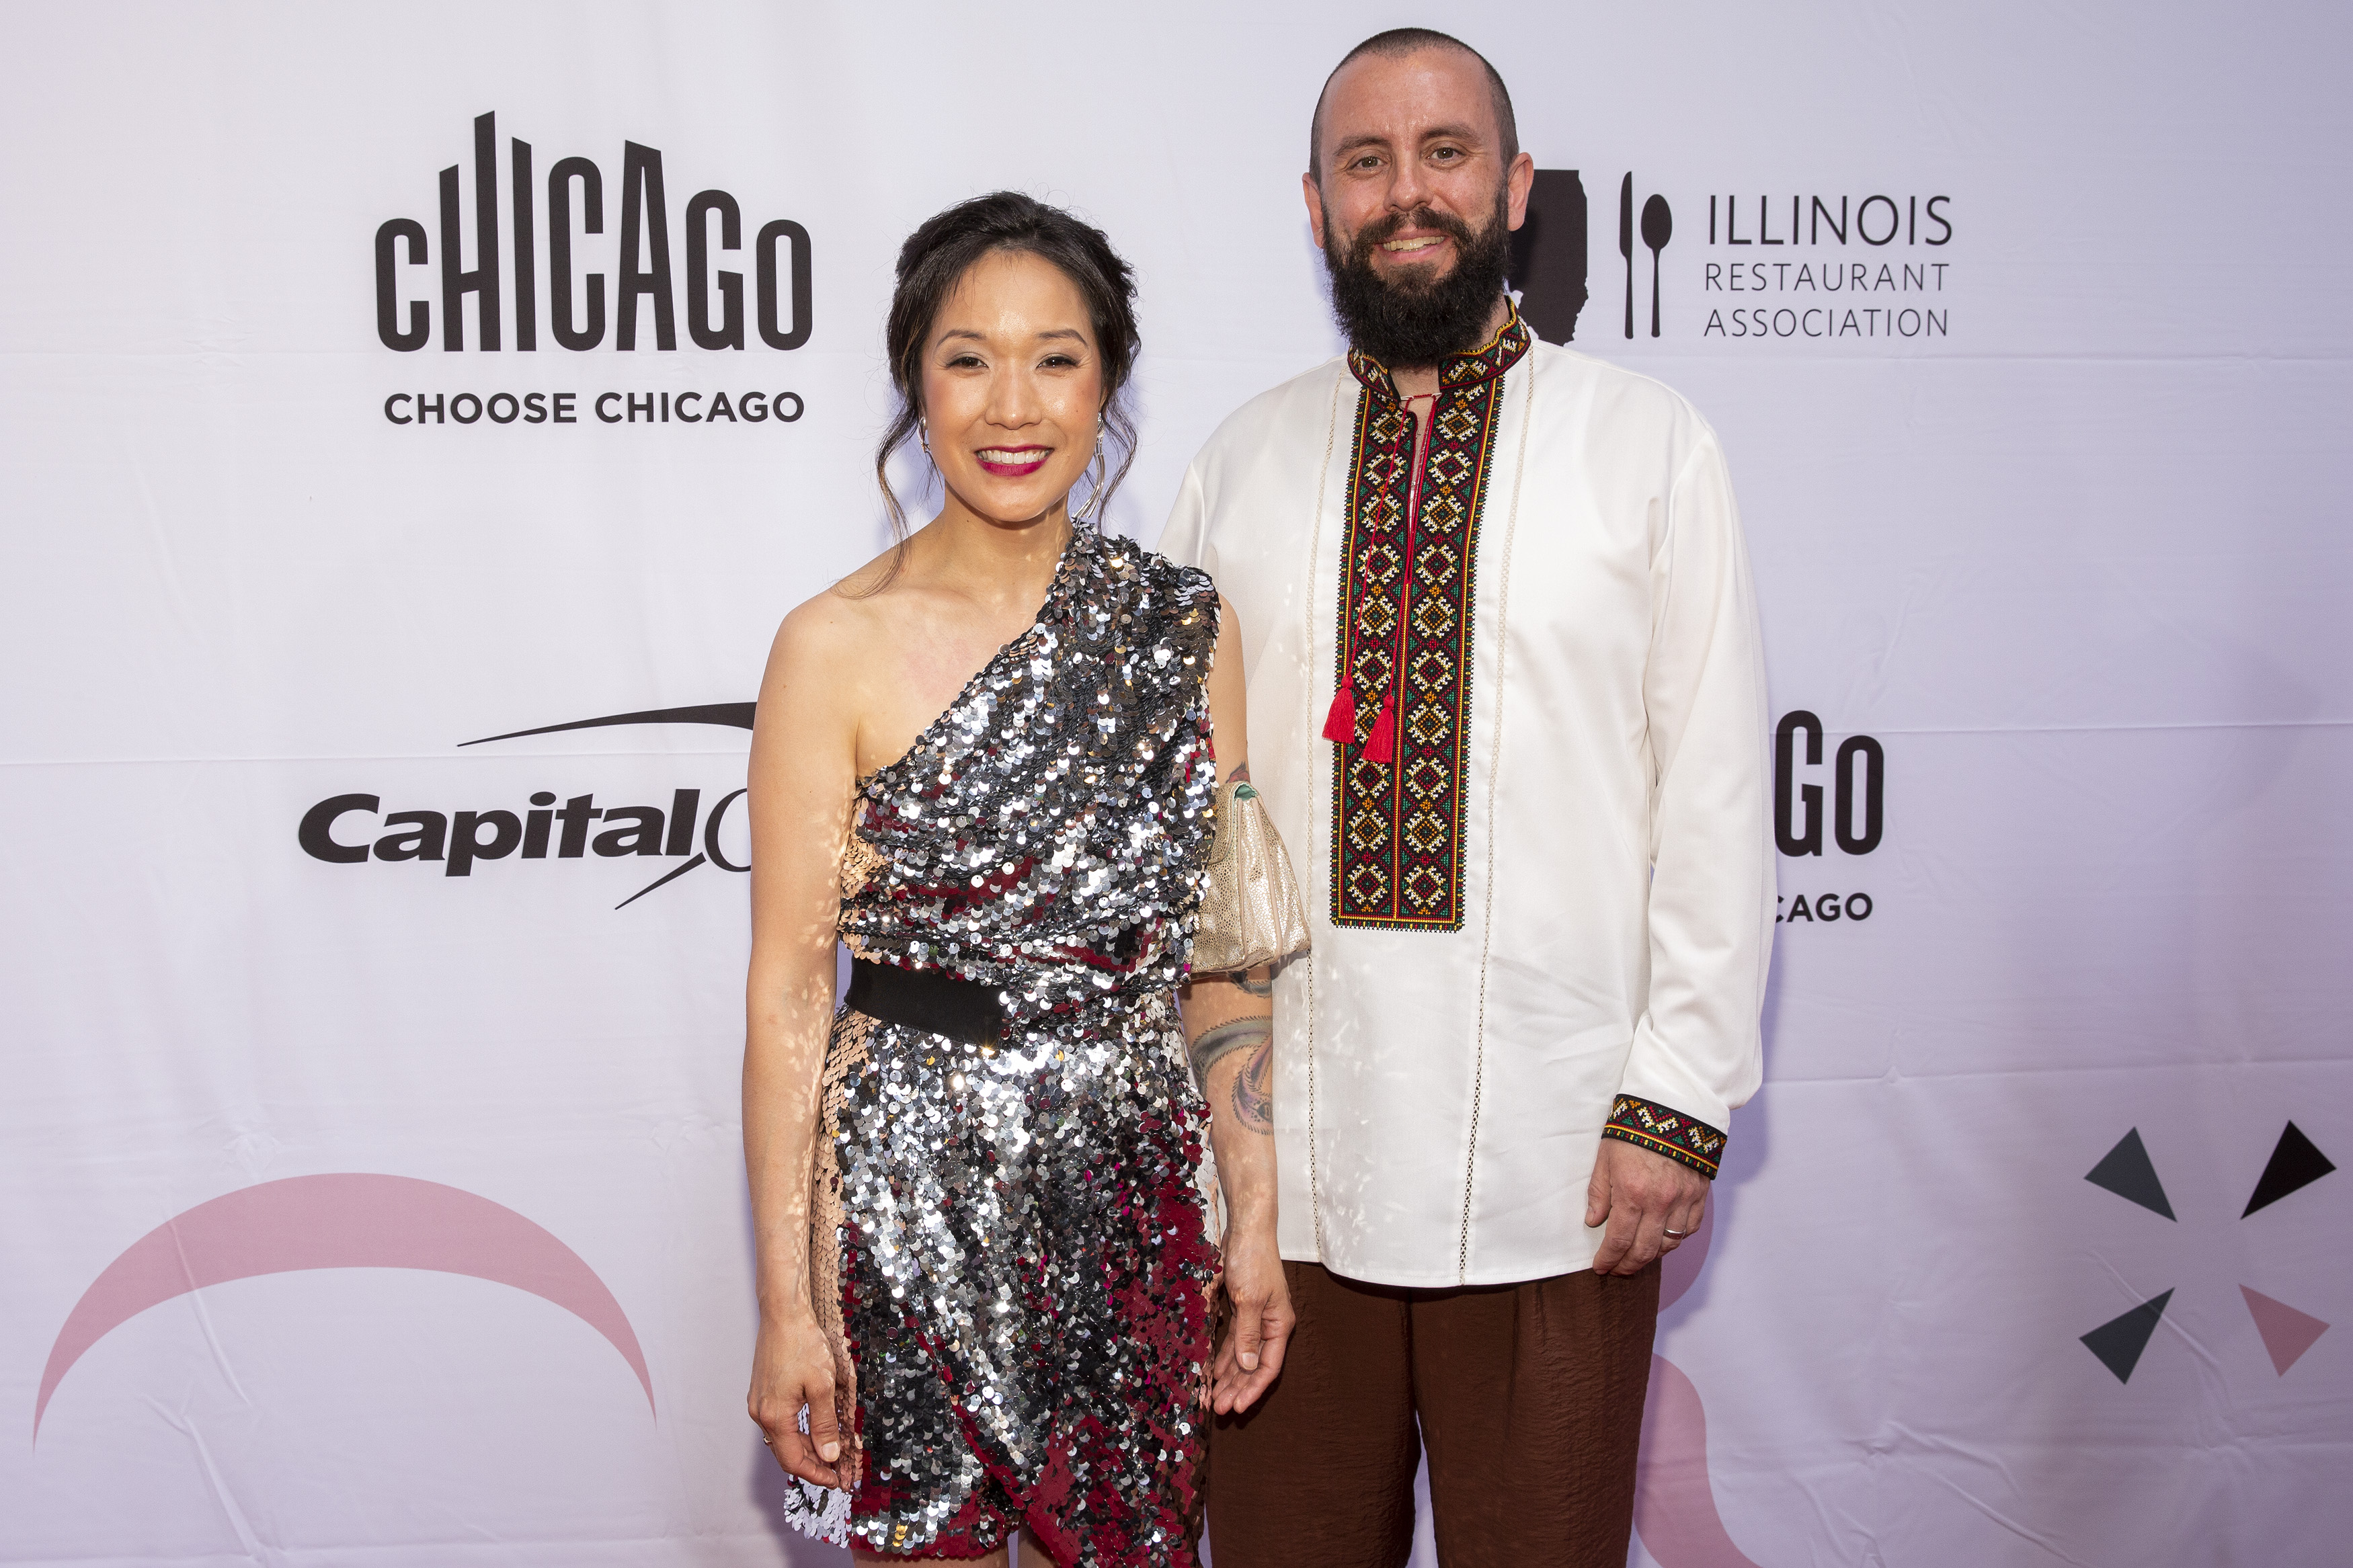 An Asian American woman and white man pose and smile on the red carpet at the James Beard awards.